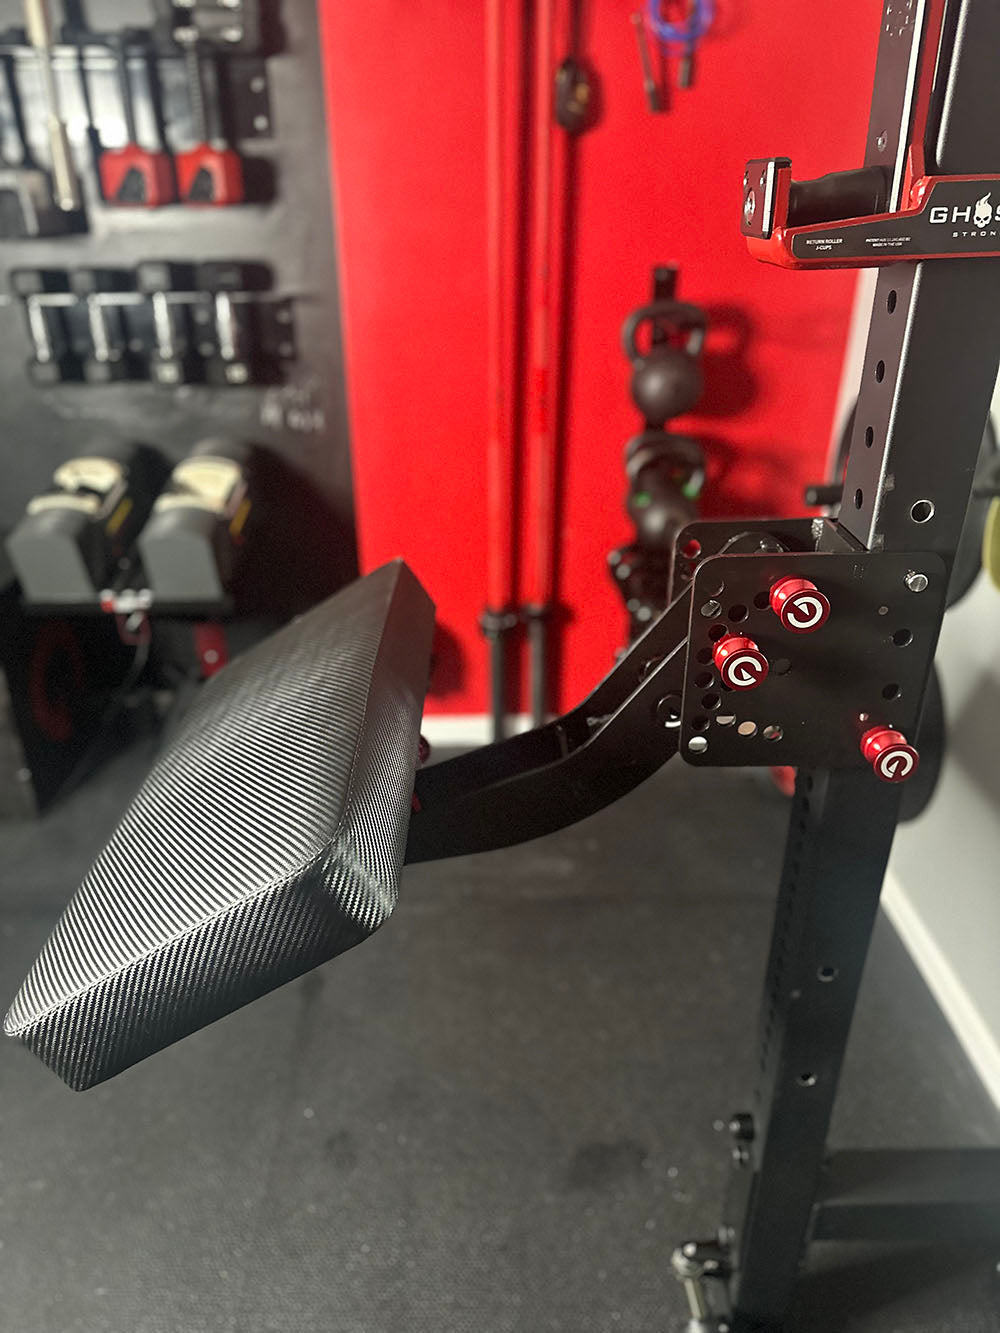 The rack-attaching, Infinity Arm can be utilized for chest-supported, arm-supported, back-supported, head-supported, and many other supported exercises. This image presents the Infinity Large Pad Attachment attached to a power rack from a side view.